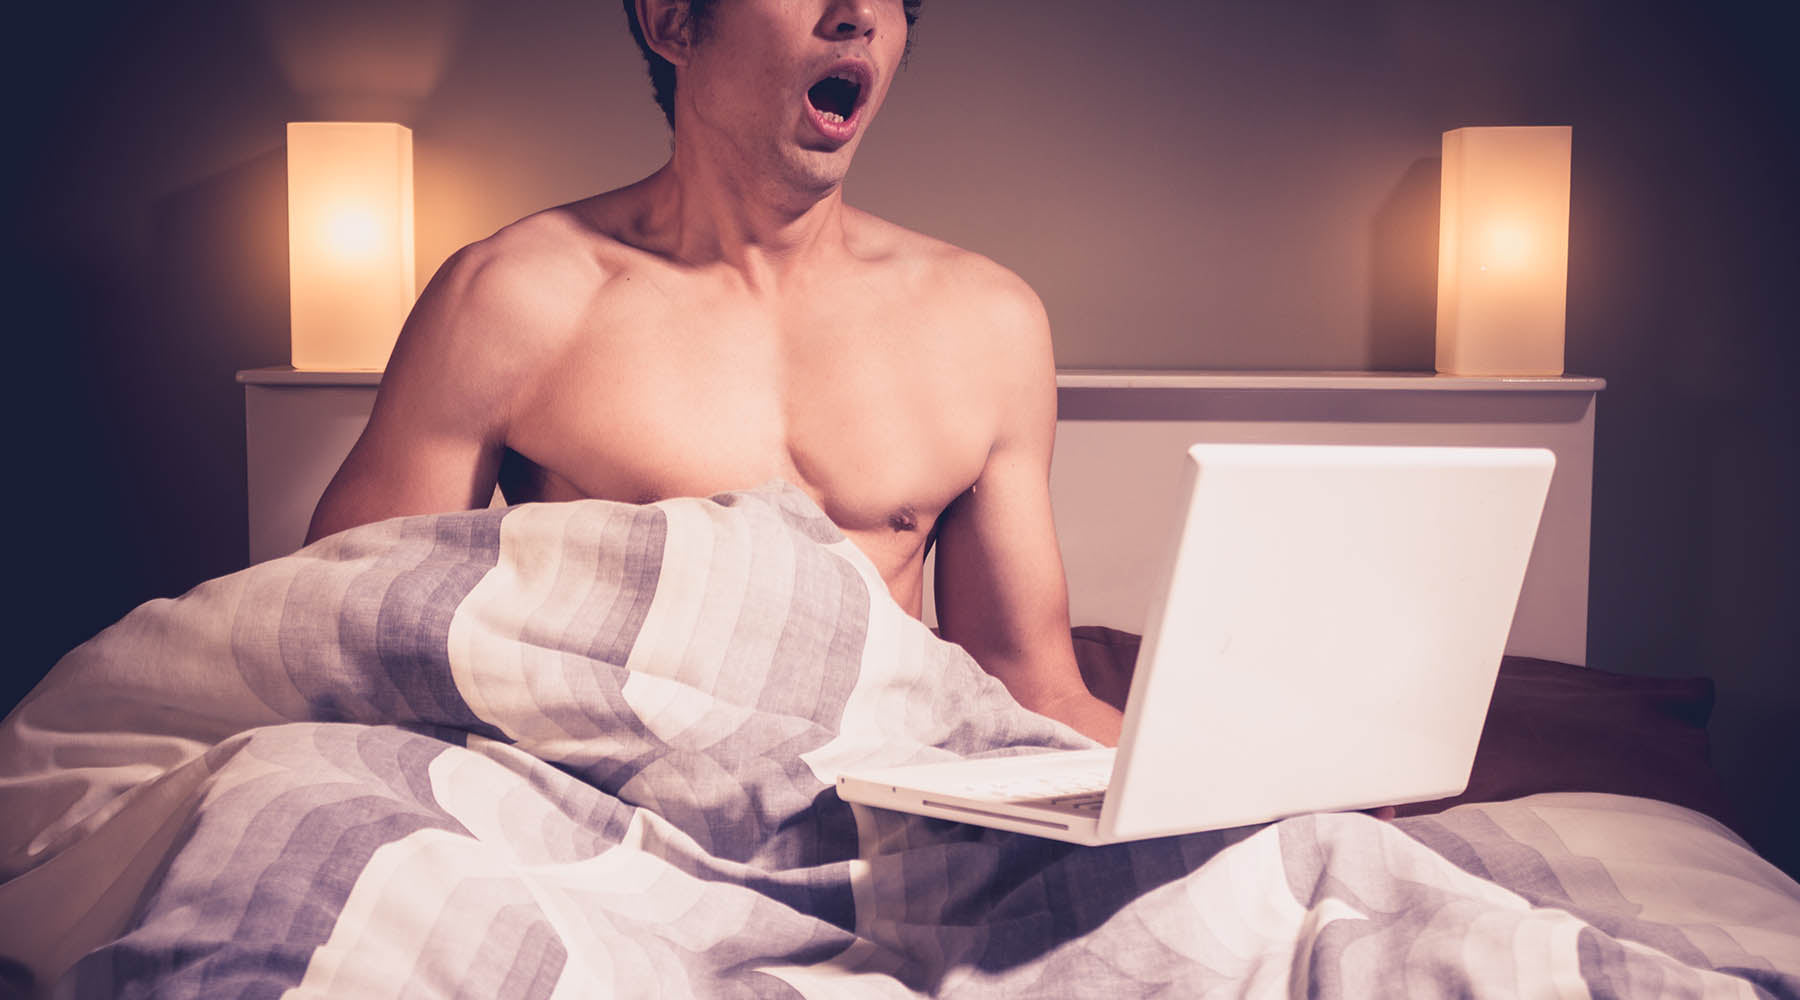 Shirtless man in bed with laptop that could benefit from masturbation training